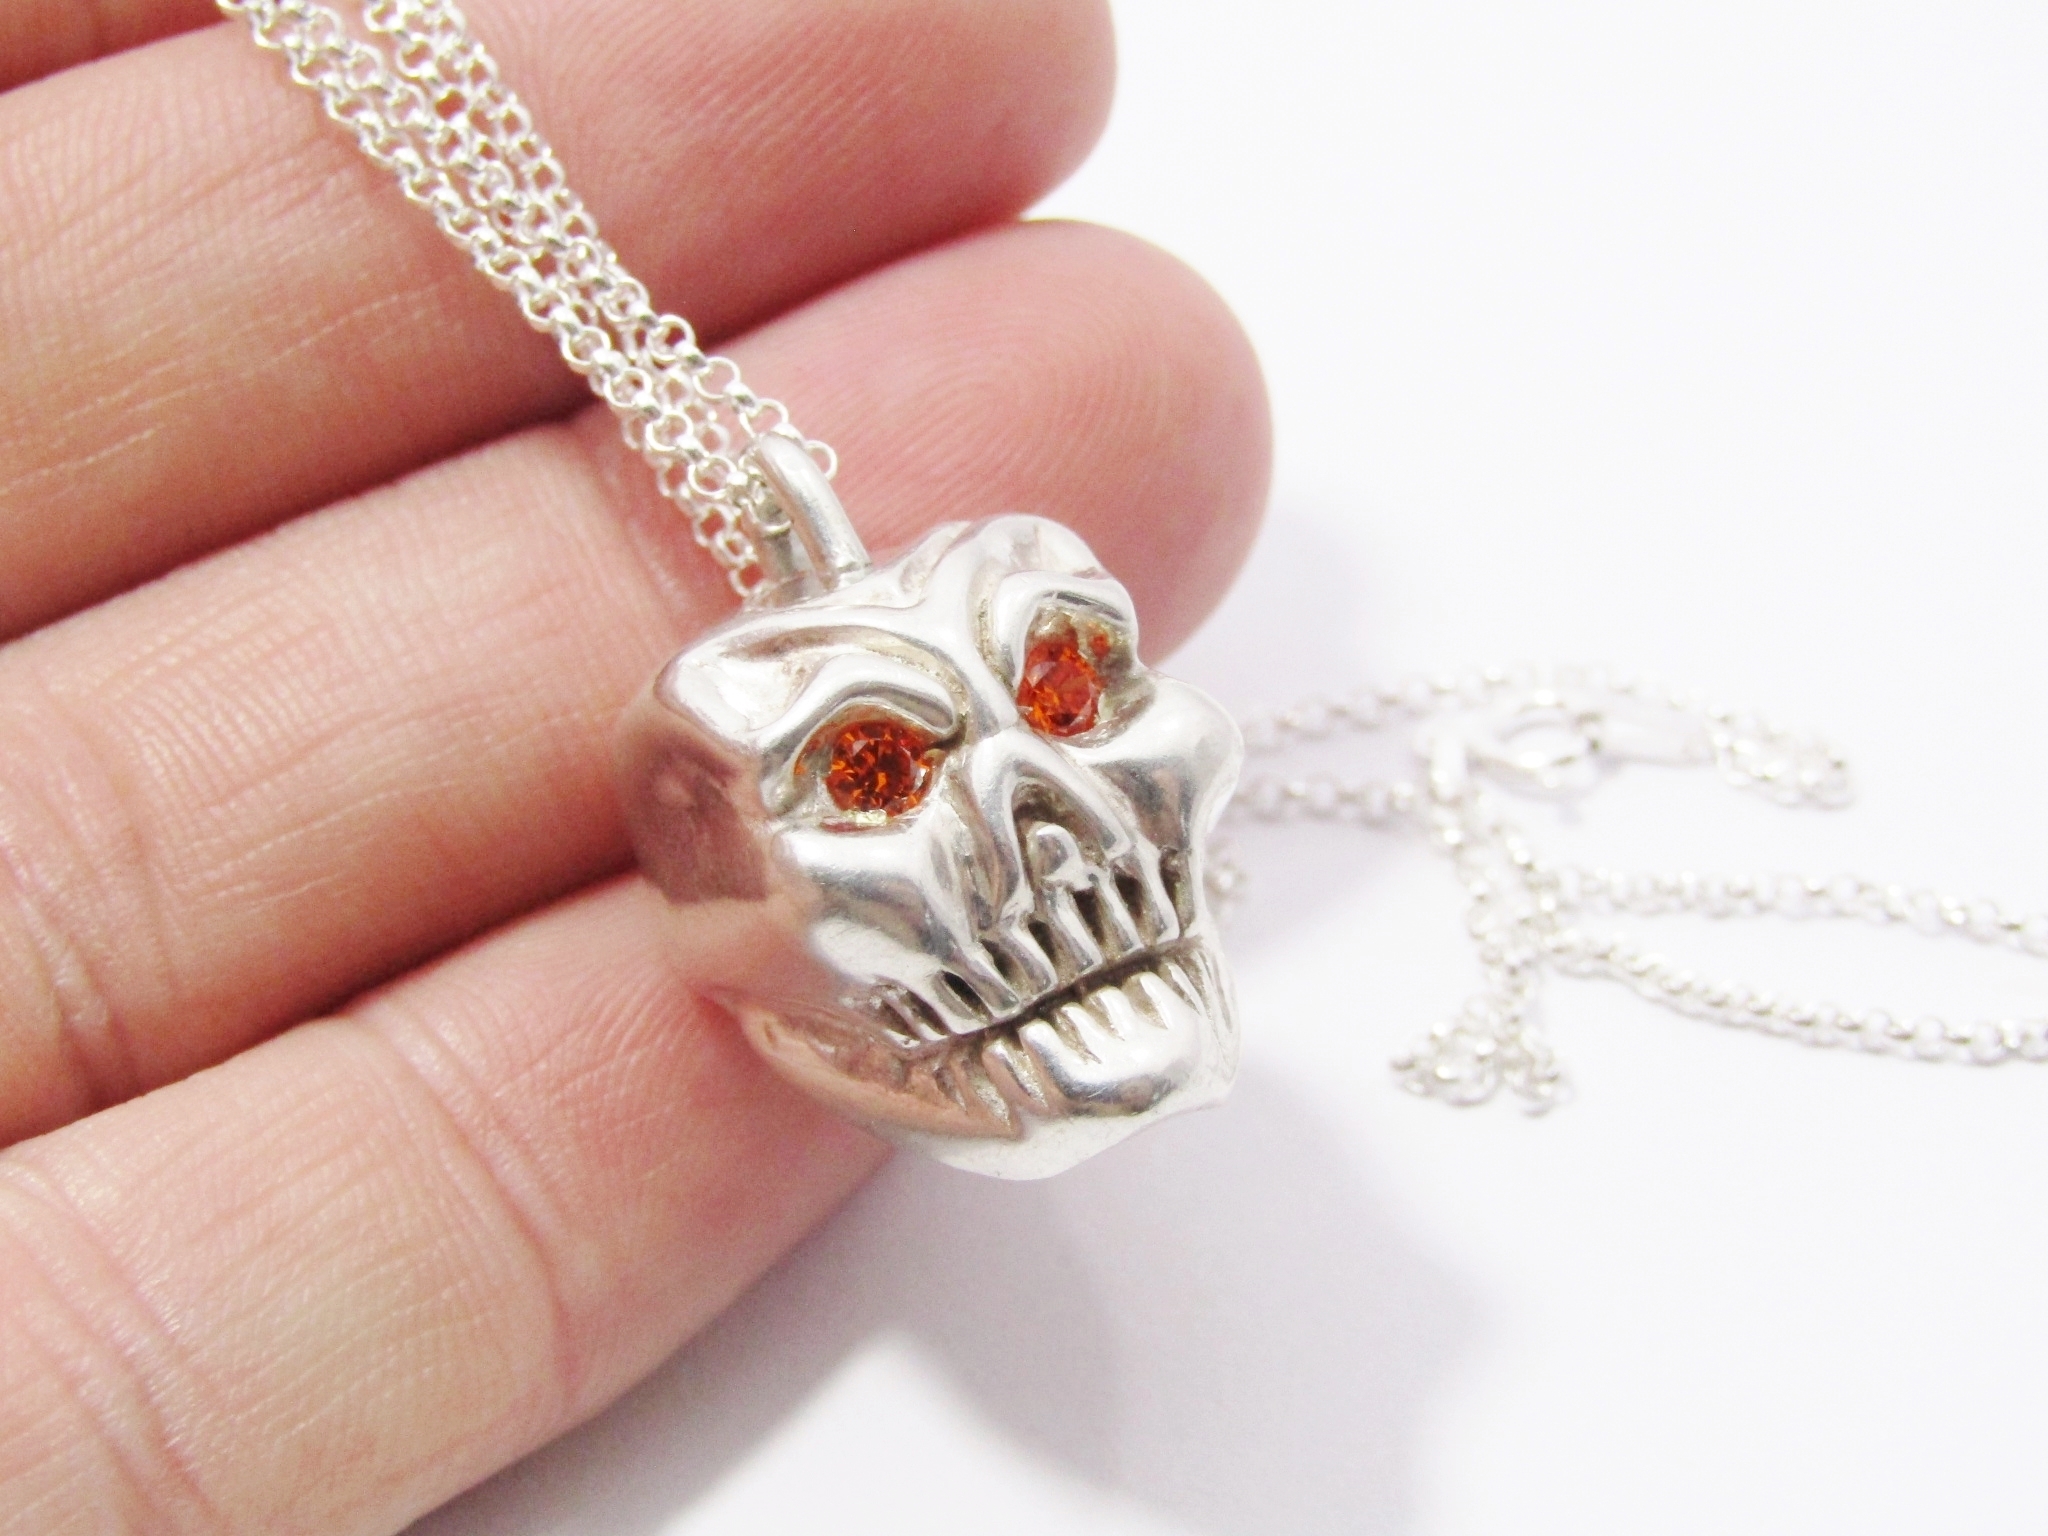 A Stunning Skull Pendant With Zirconia Eyes On Chain in Sterling Silver